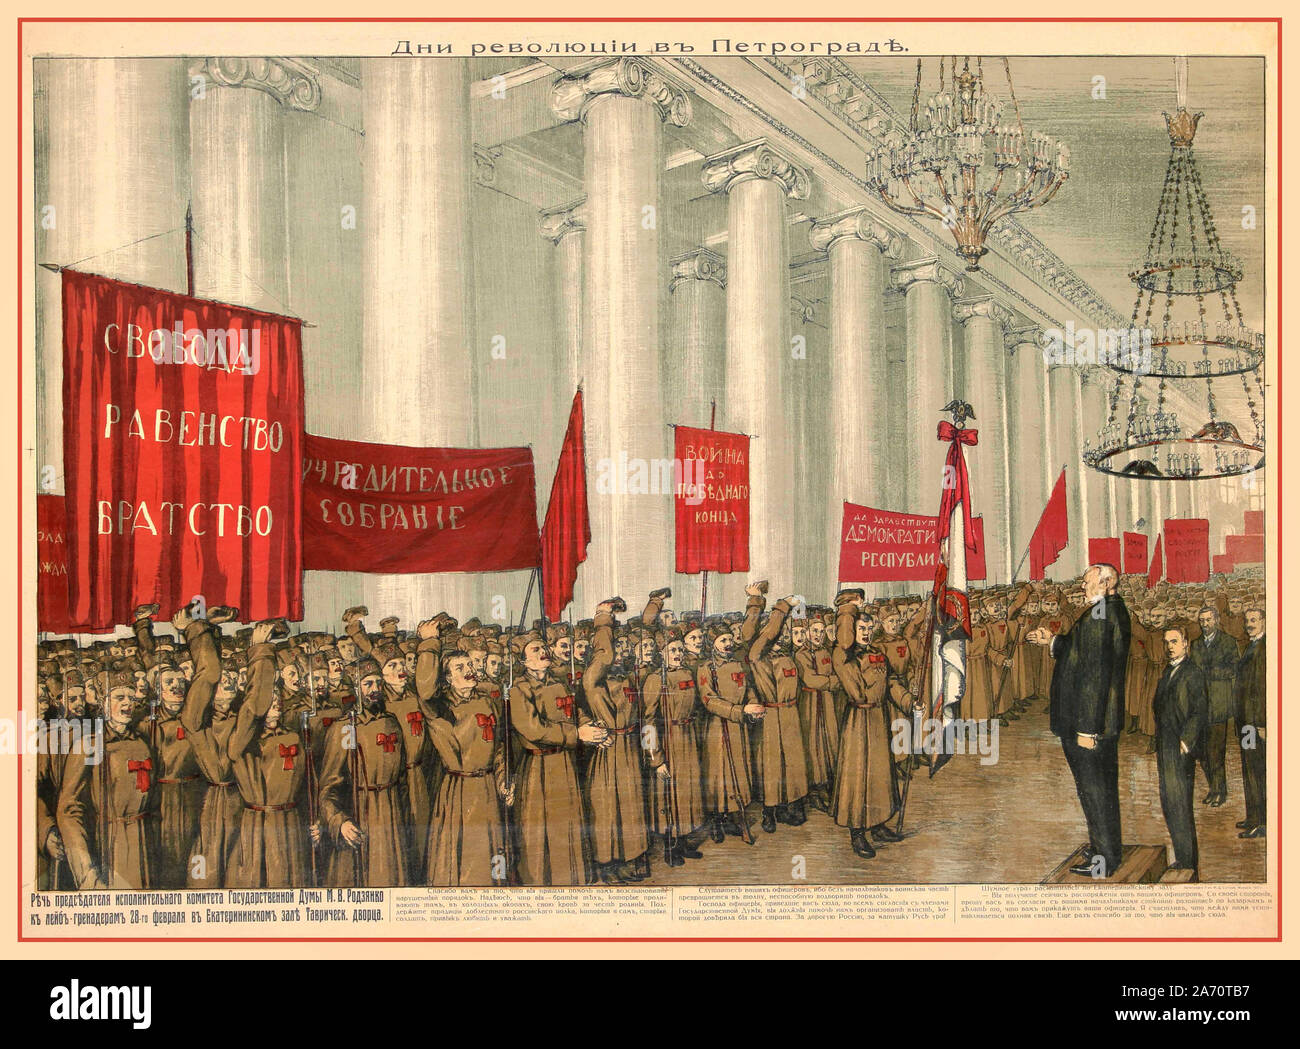 Vintage Russian 1900’s propaganda poster TAVRIDA PALACE showing the days of the February Revolution 1917 in Petrograd and the speech of the Chairman of the Non-Executive Committee of the State Duma on February 8, 1917 in the Catherine's Hall of the Tavrida Palace. The State Duma or Imperial Duma was the Lower House, part of the legislative assembly in the late Russian Empire, which held its meetings in the Taurida Palace in St. Petersburg. It convened four times between 27 April 1906 and the collapse of the Empire in February 1917. Stock Photo